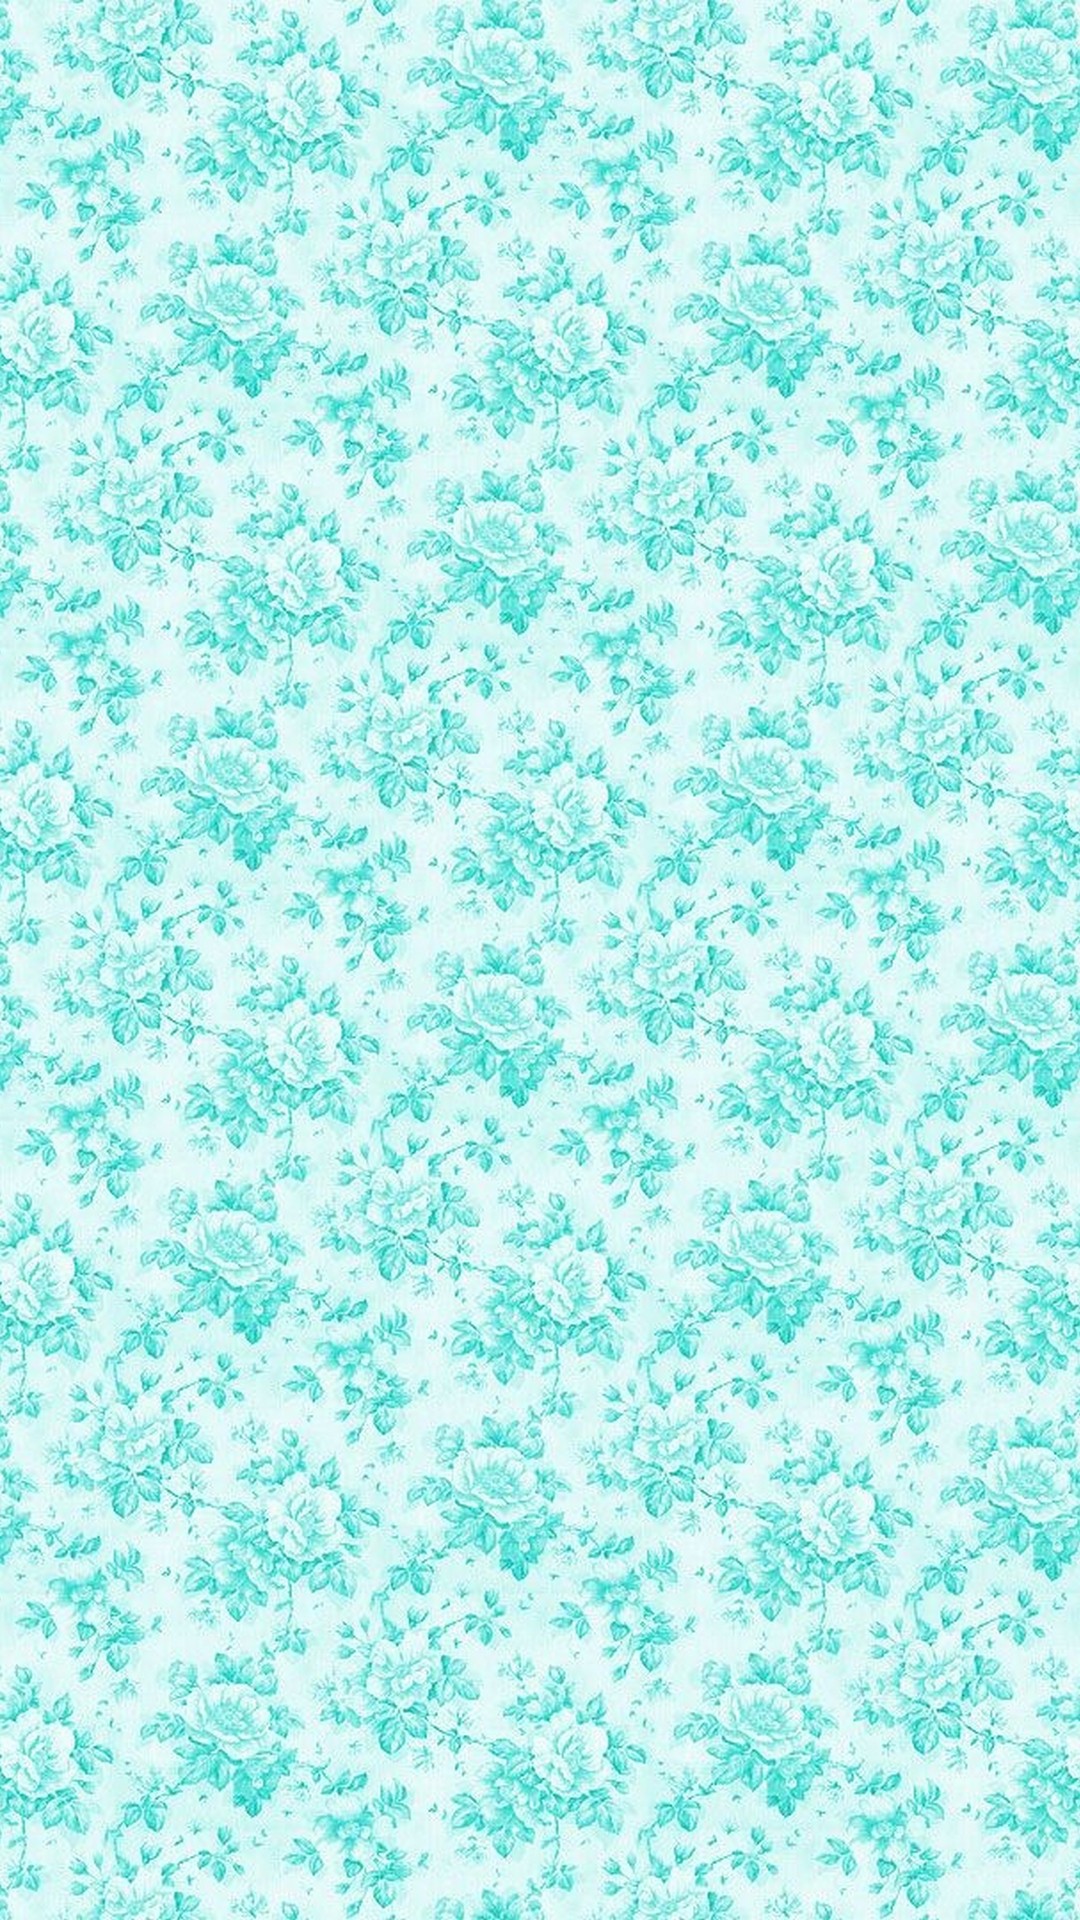 Mint Green Wallpaper iPhone with image resolution 1080x1920 pixel. You can make this wallpaper for your iPhone 5, 6, 7, 8, X backgrounds, Mobile Screensaver, or iPad Lock Screen